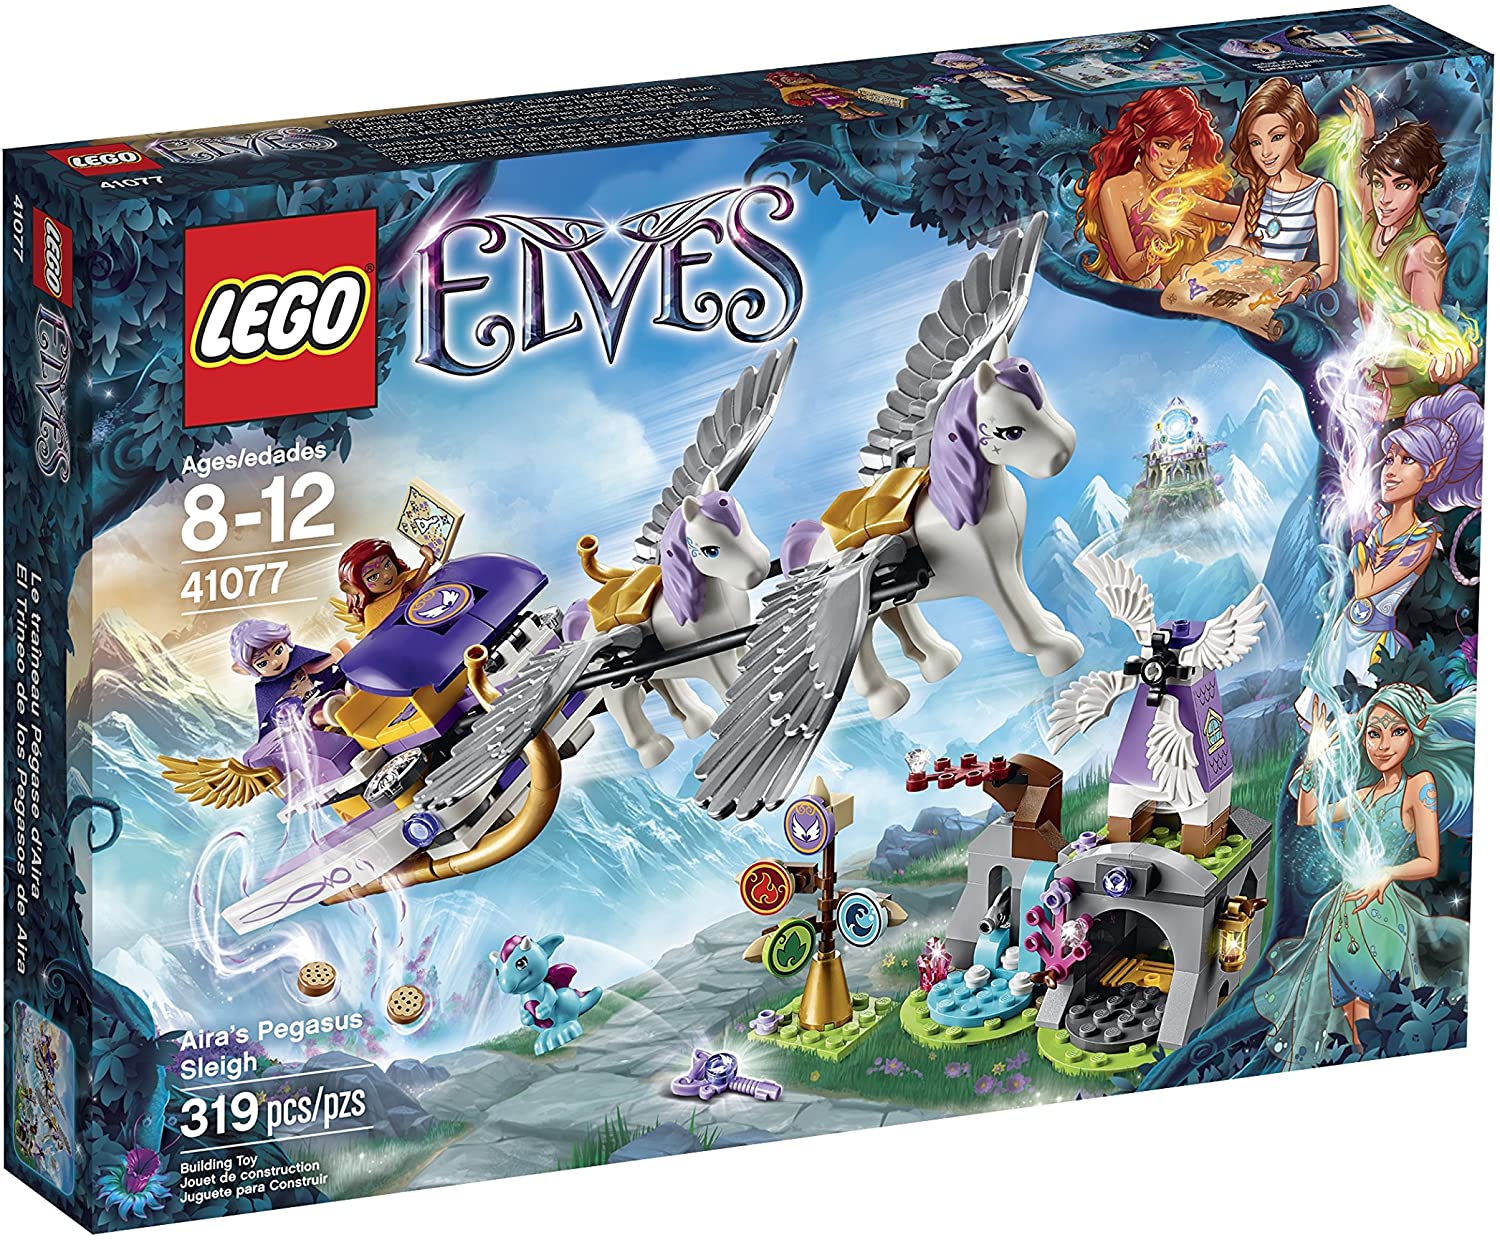 LEGO Elves The Water Dragon Adventure 41172 - Dragon and Mini Figure Only